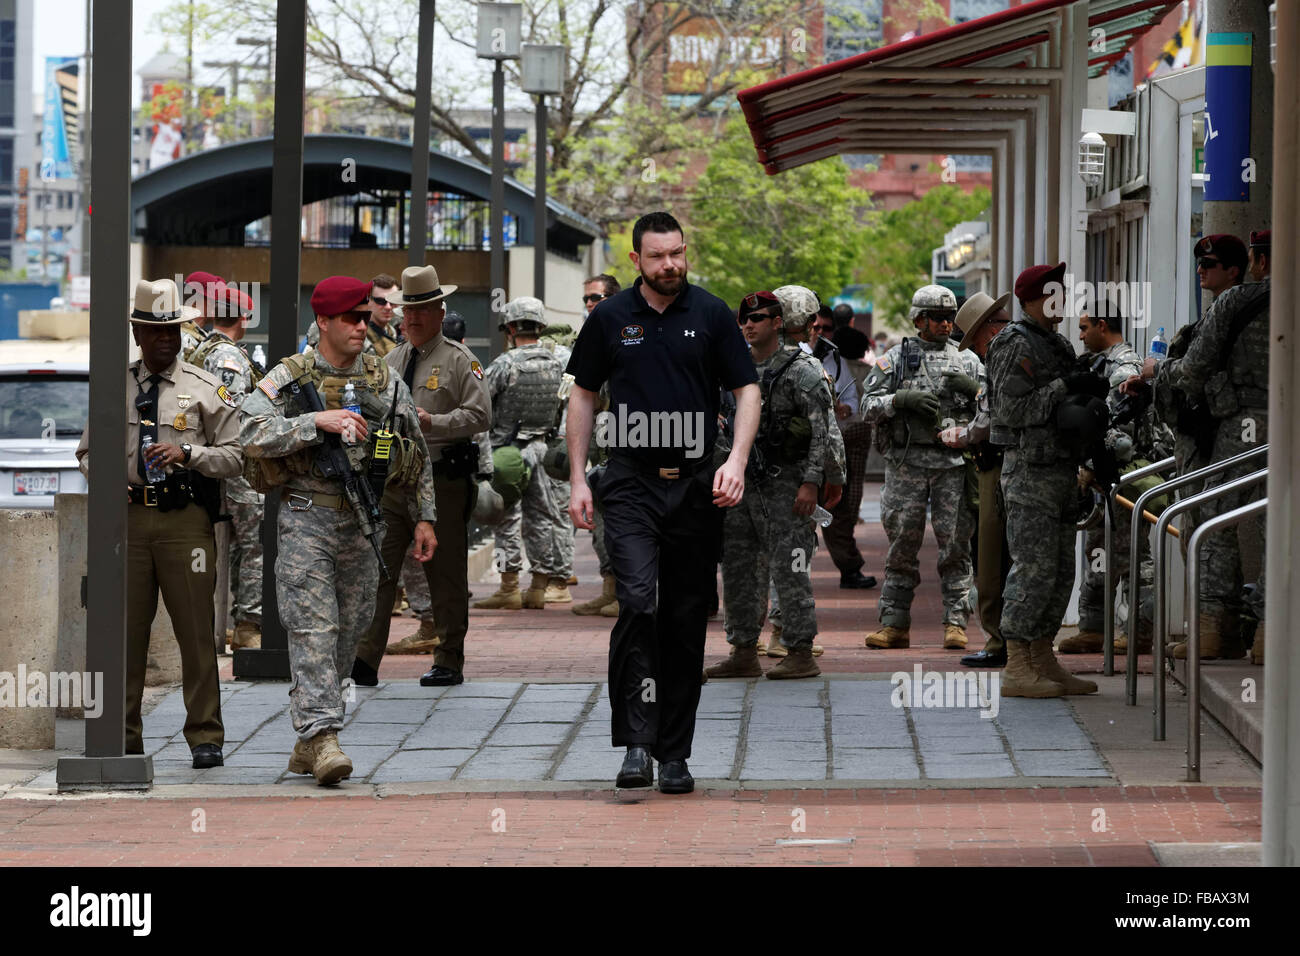 A man walks through a phalanx of National Guardsmen in the inner harbor area of Baltimore after rioting the previous night. Stock Photo